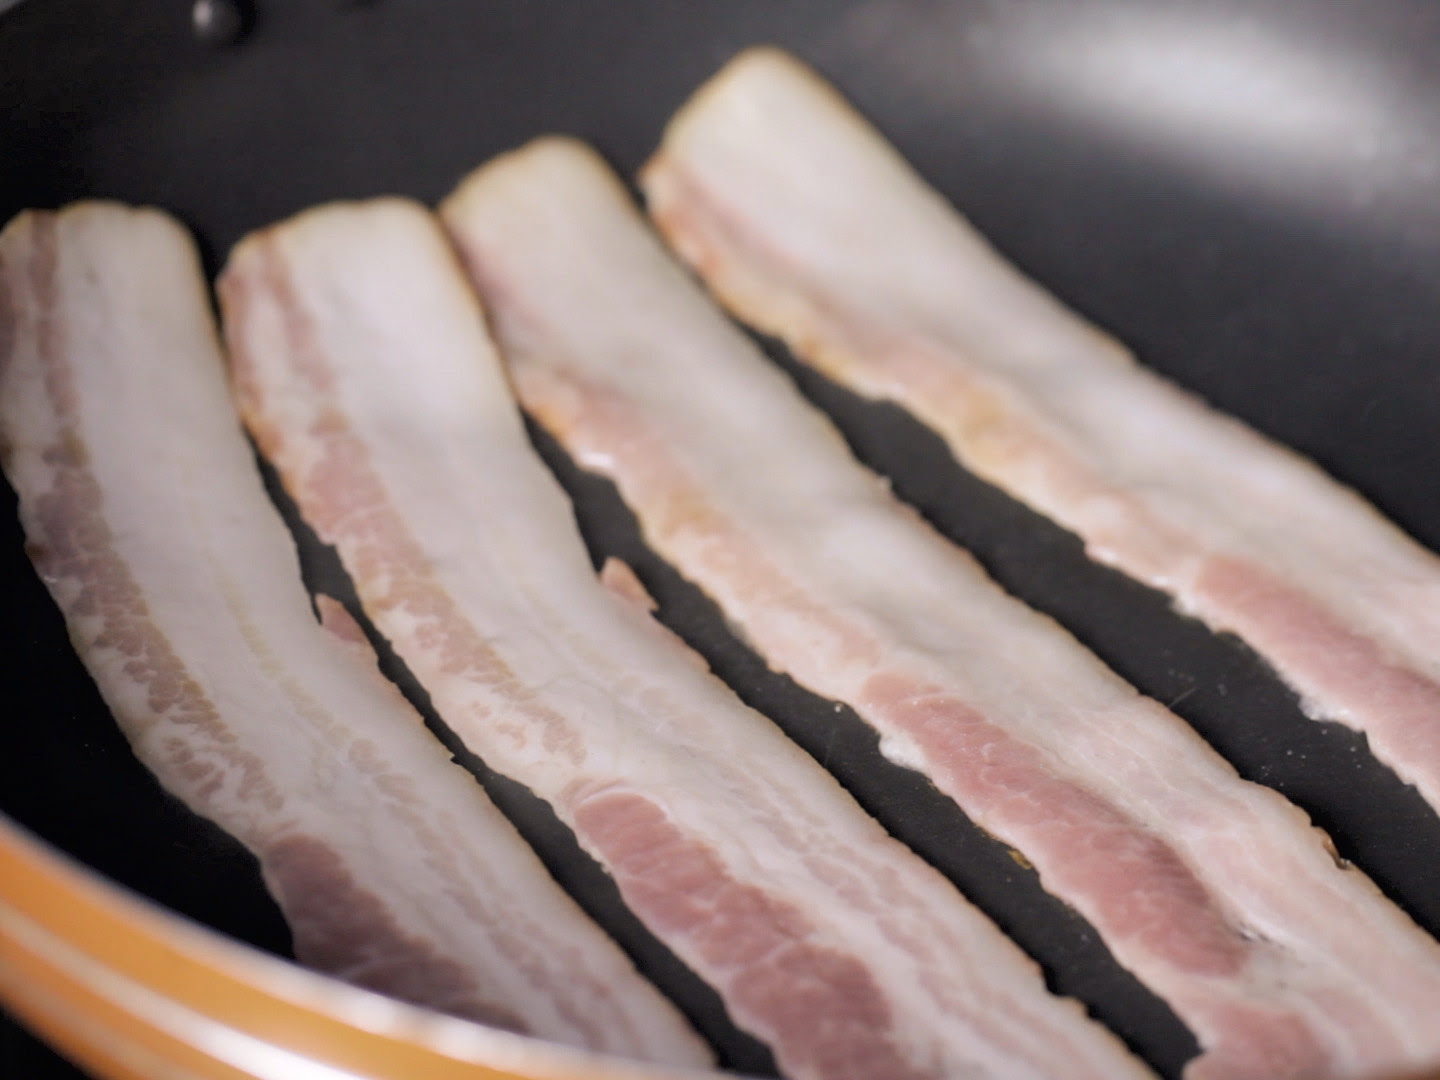 3 Ways to Cook Frozen Bacon - wikiHow